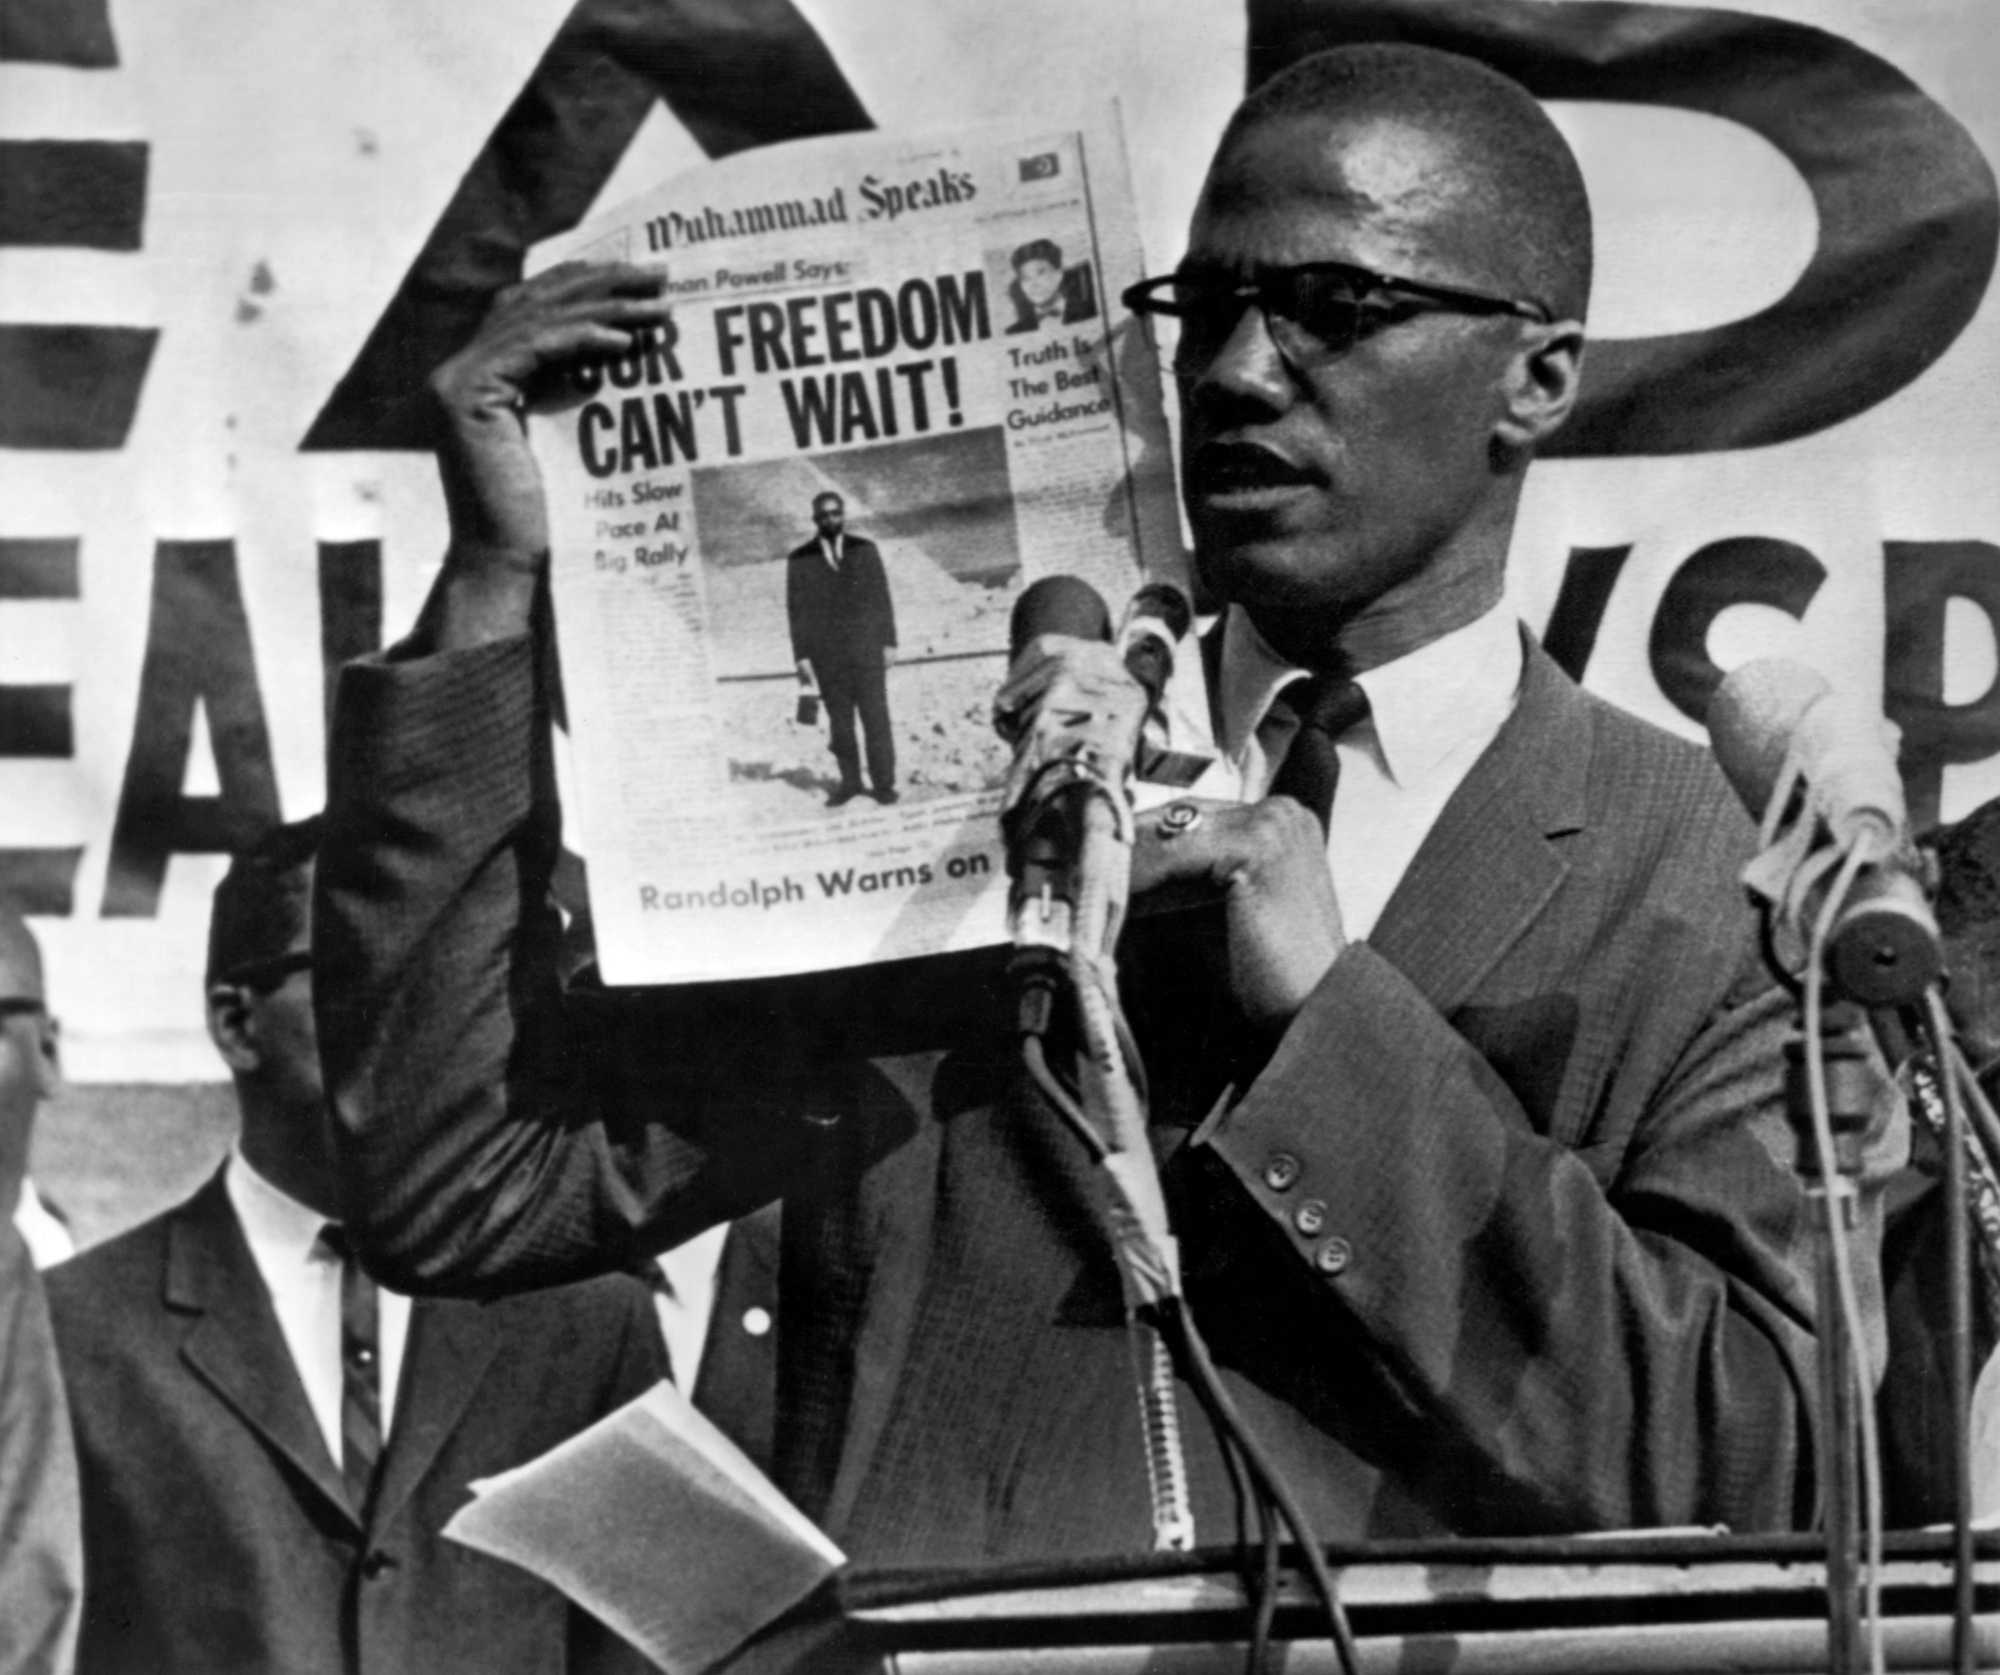 Malcolm X holds up an issue of Muhammad Speaks newspaper during a rally in Harlem, New York City